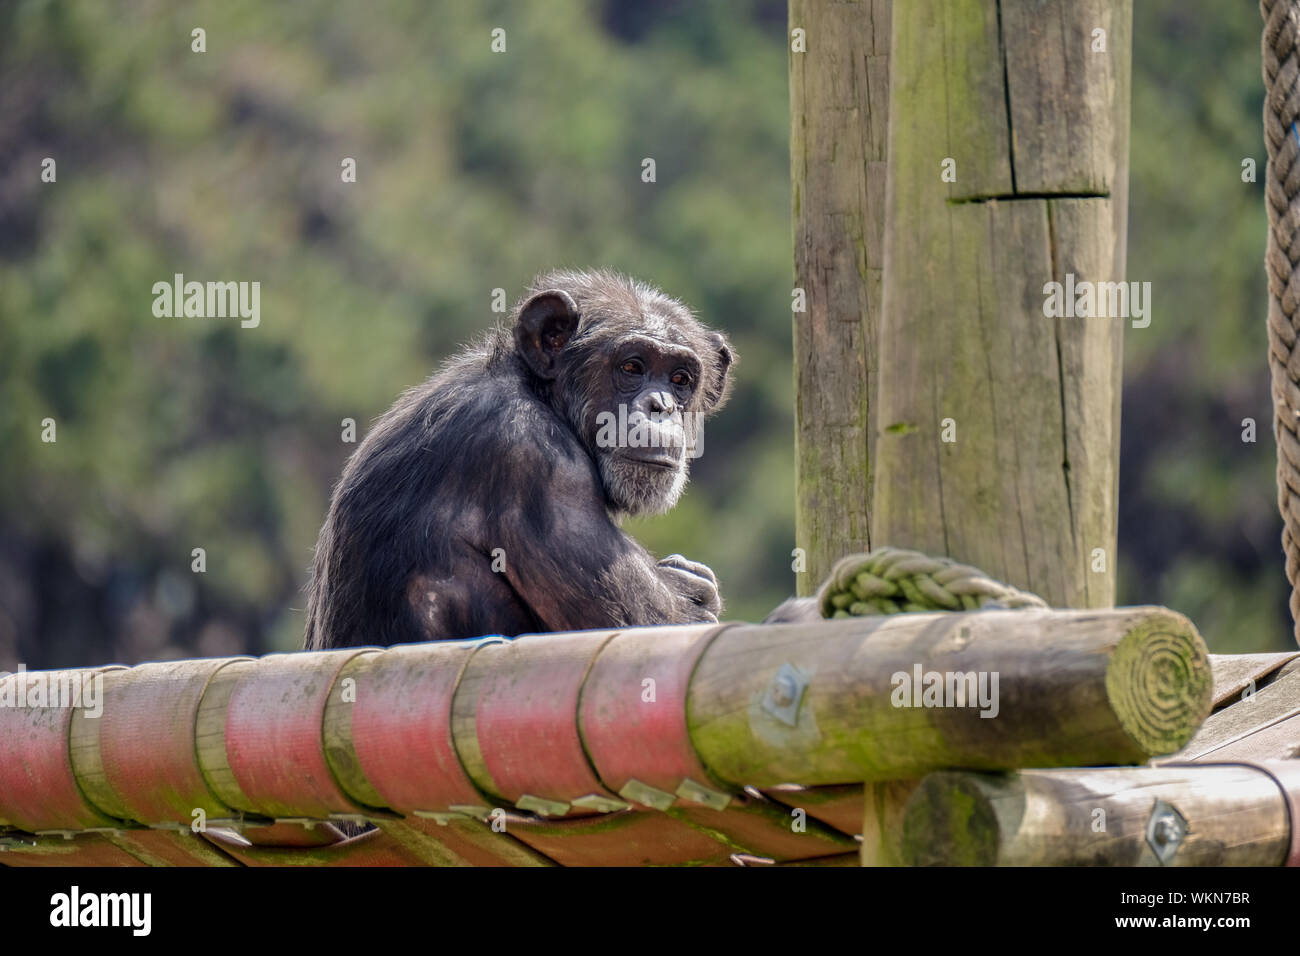 Old Chimpanzee In A Zoo Stock Photo